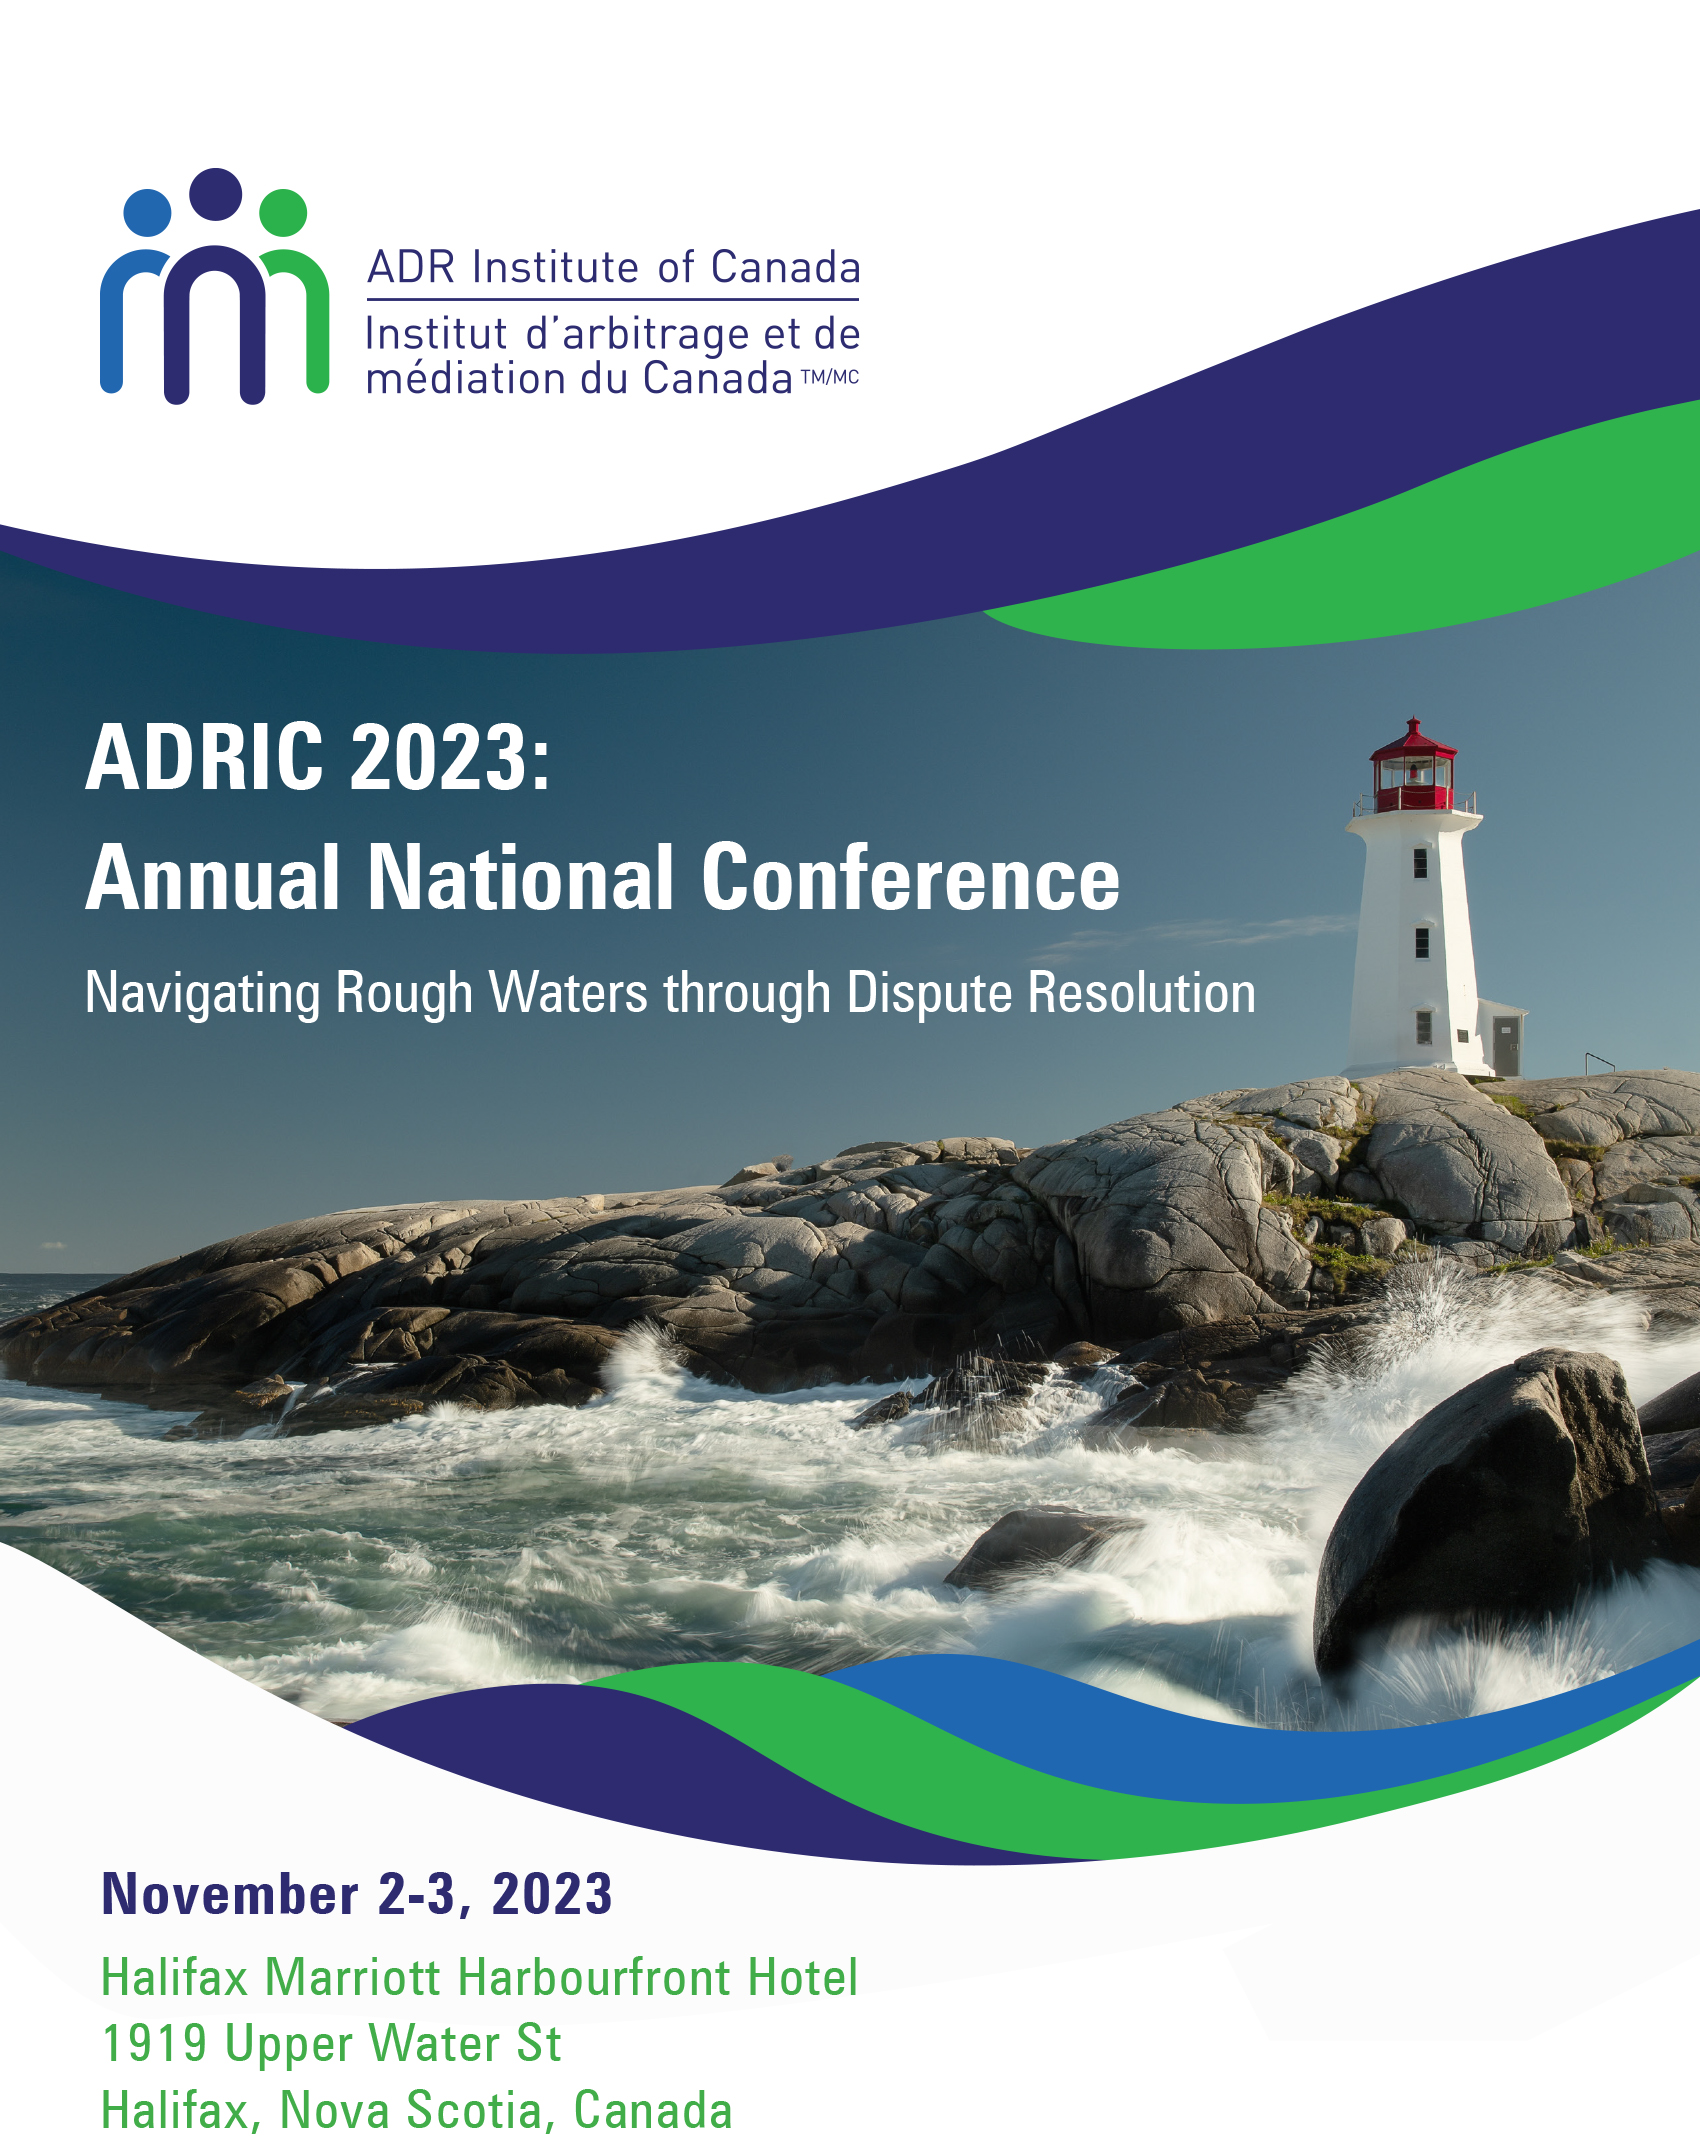 2023 Annual National Conference ADR Institute of Canada